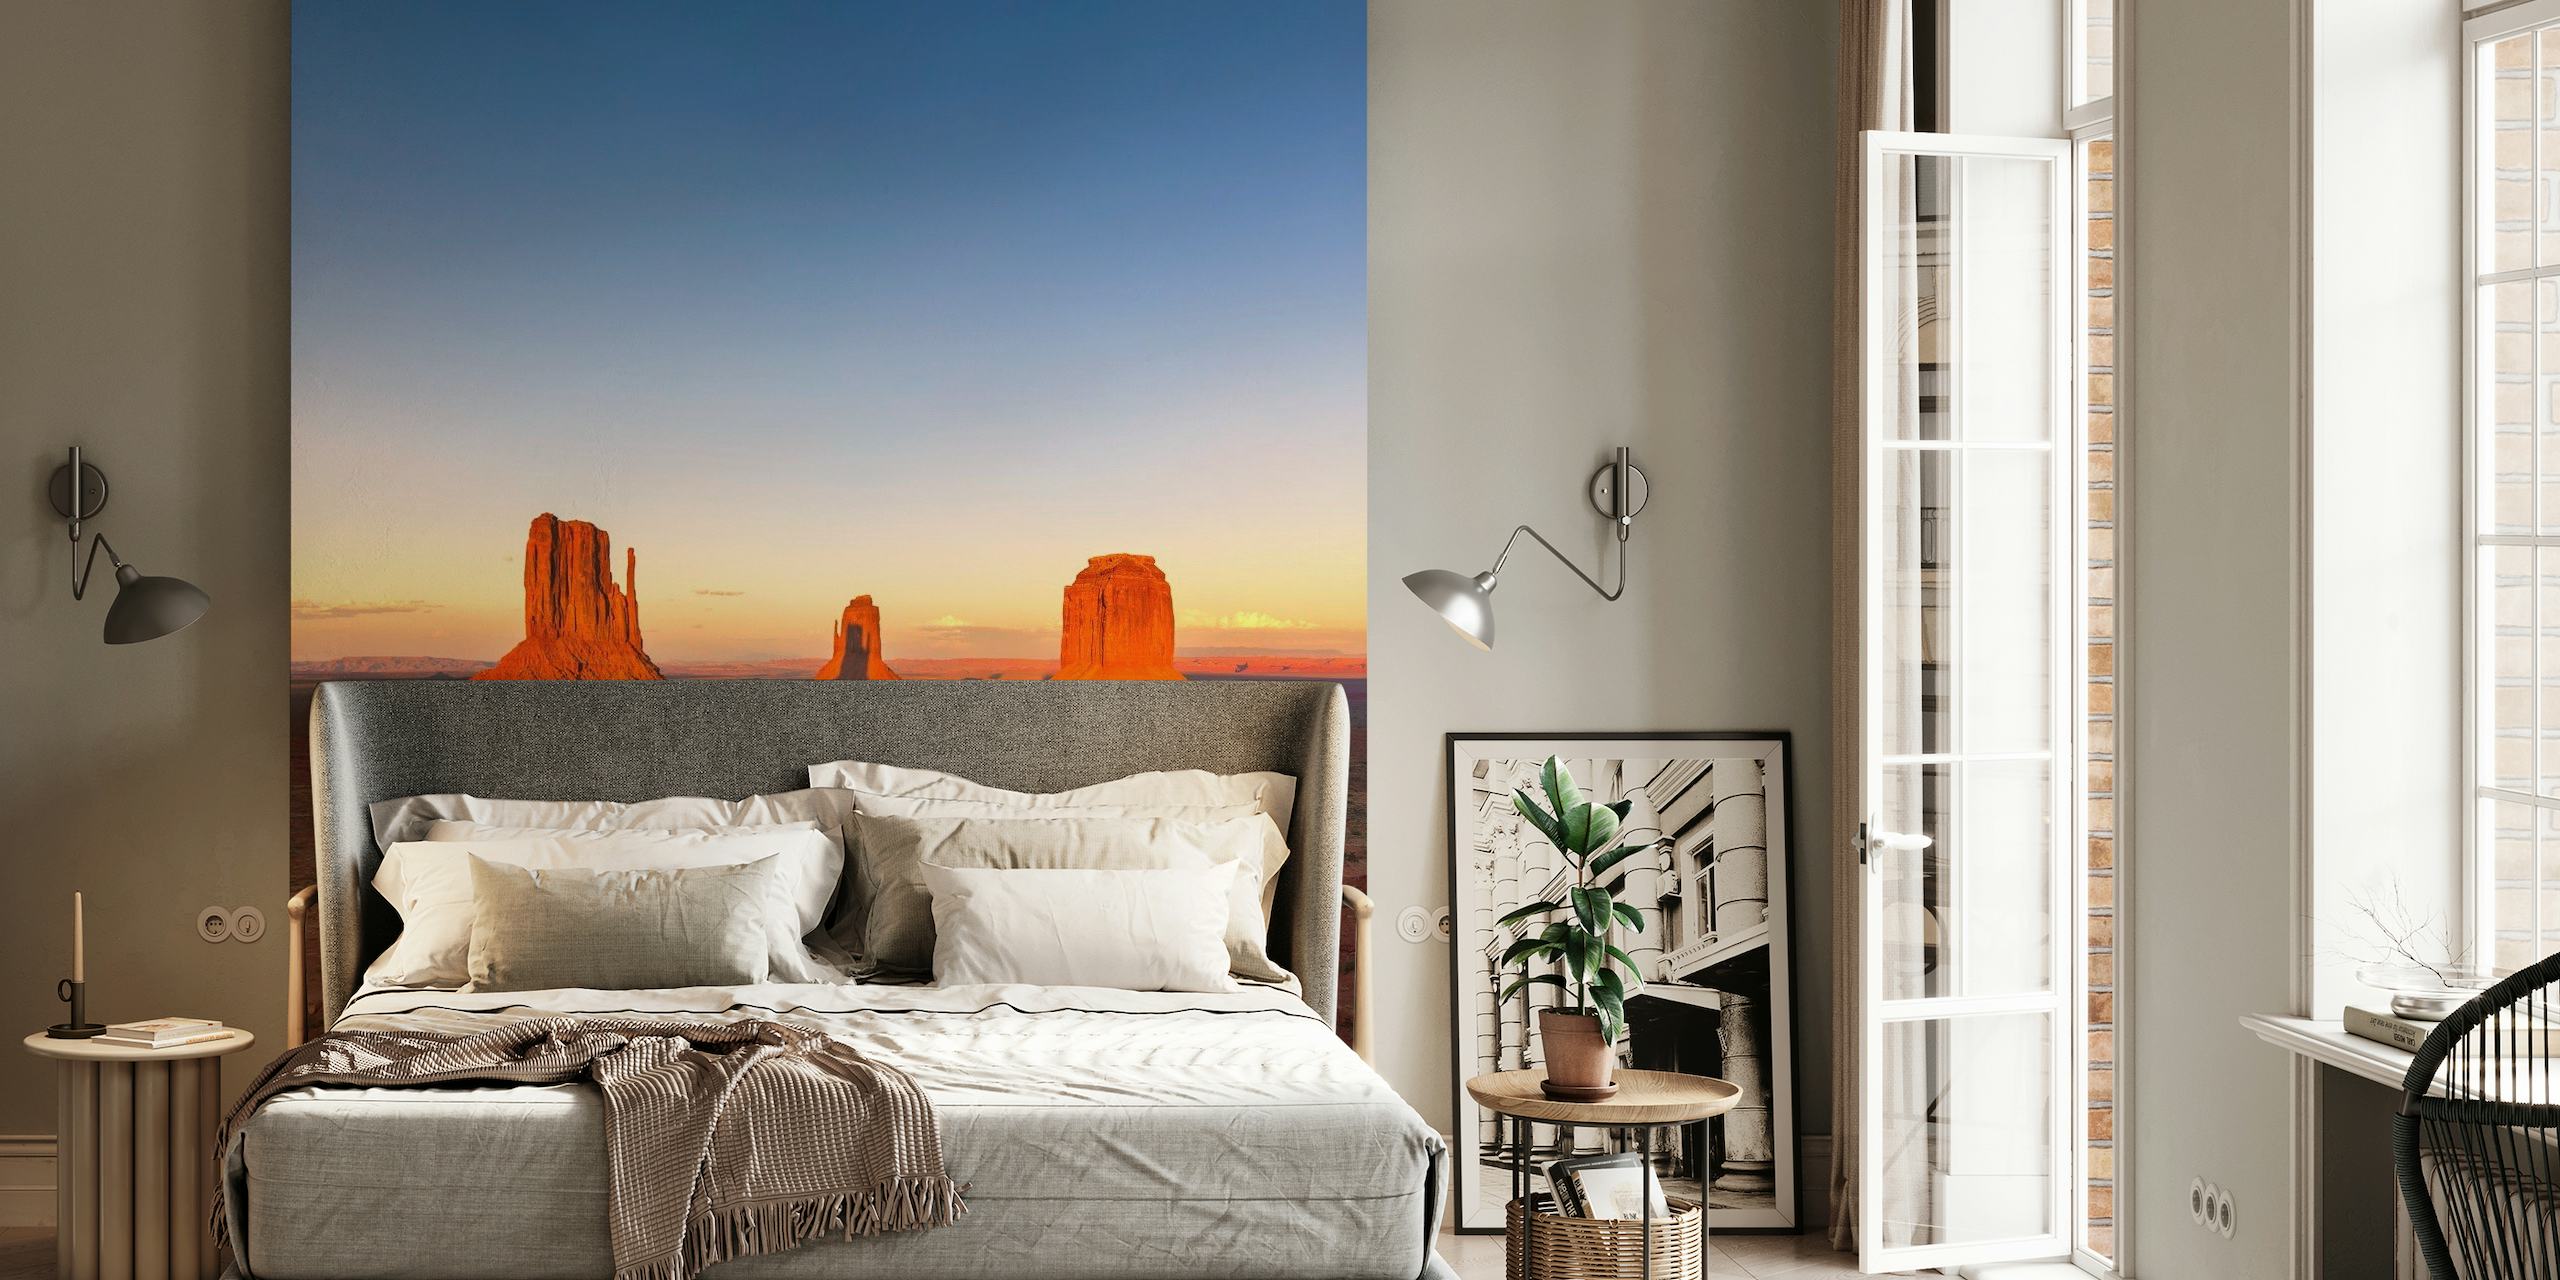 Desert sunset wall mural with landforms casts in amber